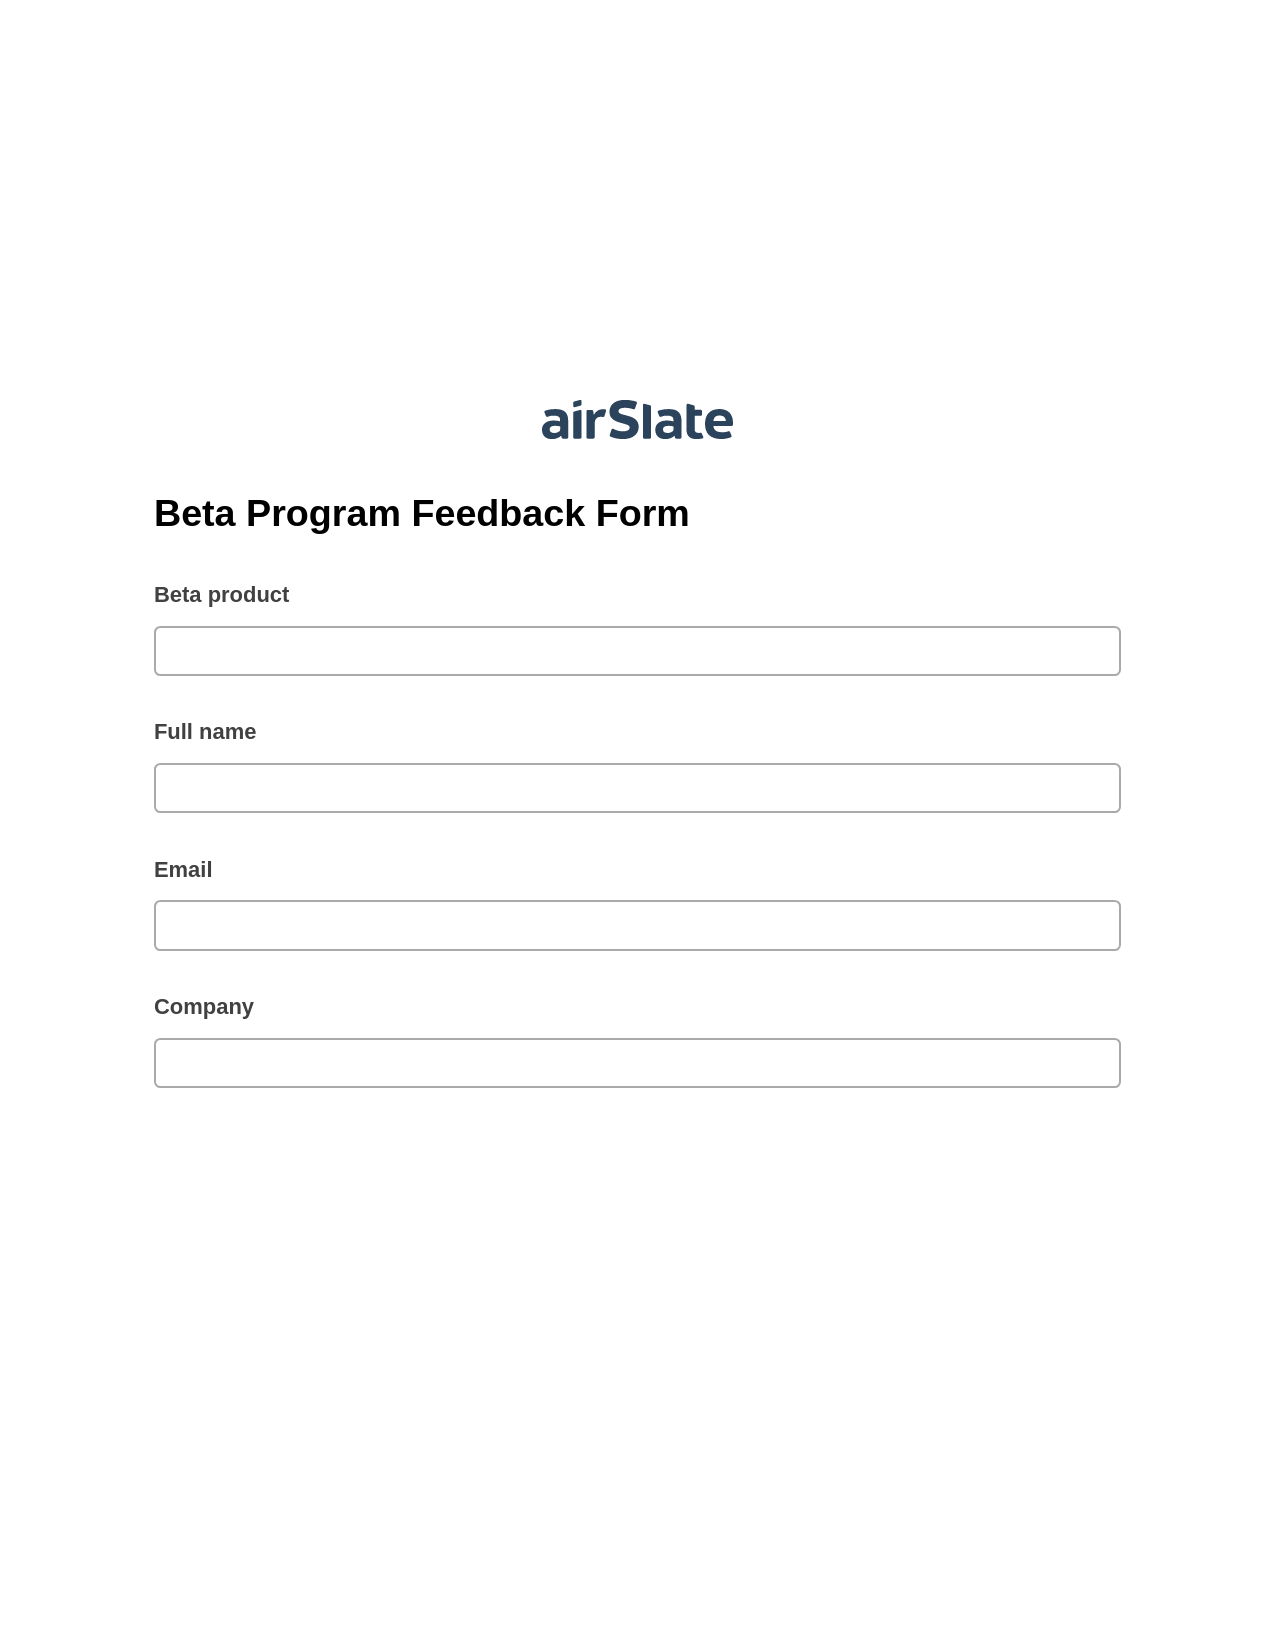 Multirole Beta Program Feedback Form Pre-fill from NetSuite Records Bot, Email Notification Bot, Dropbox Bot